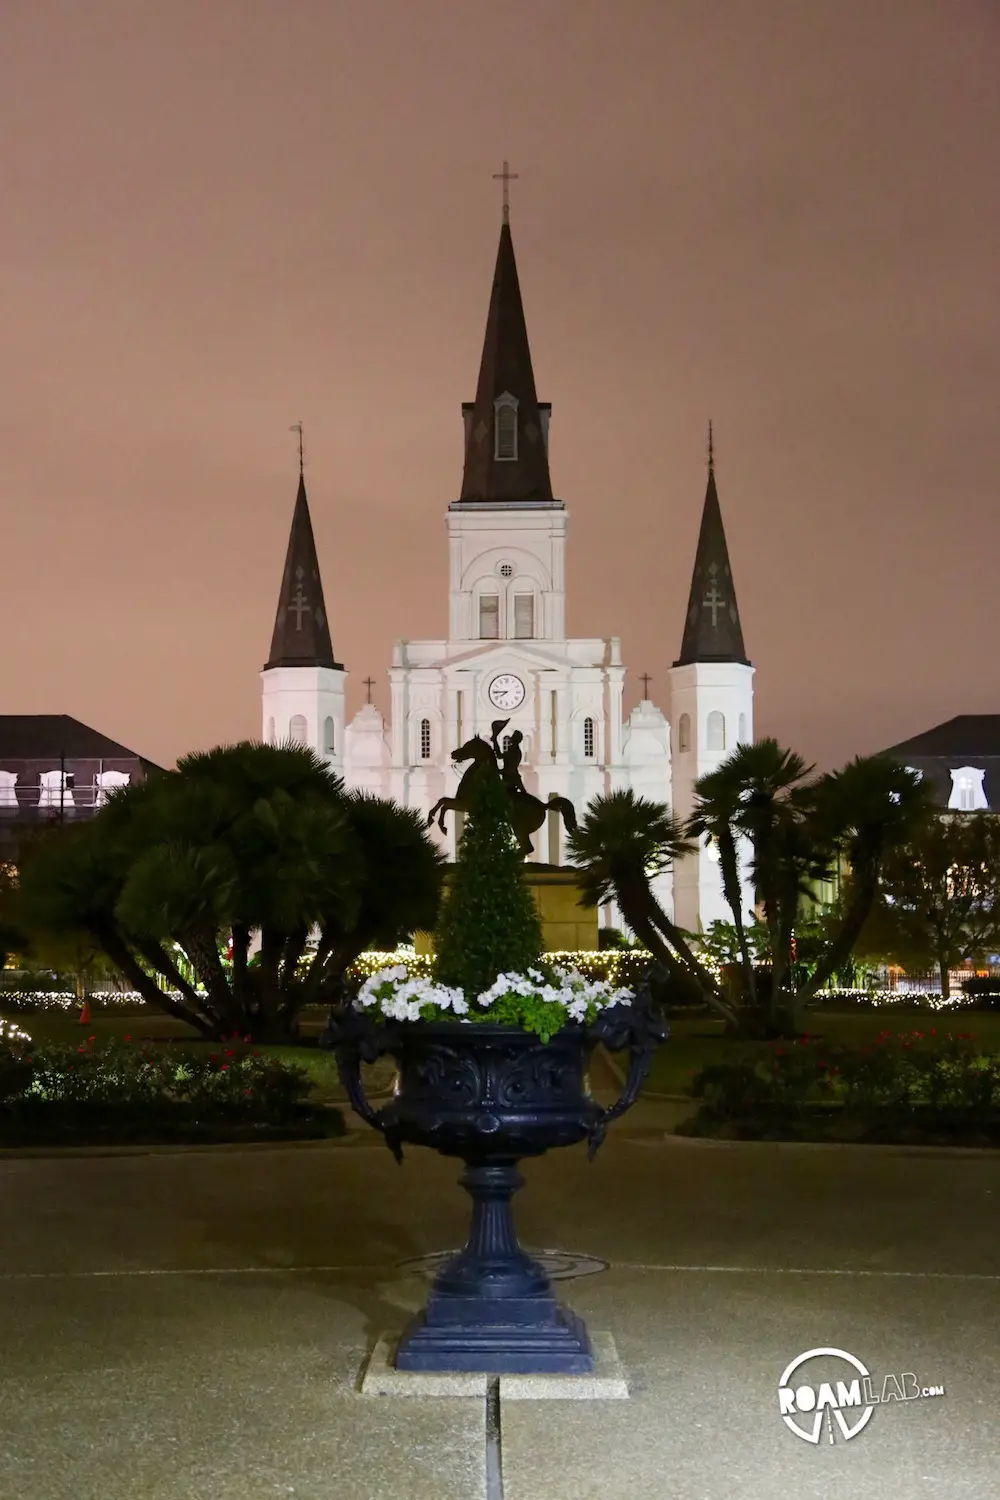 We paused to note the striking silhouette of the St. Louis Cathedral in New Orleans.